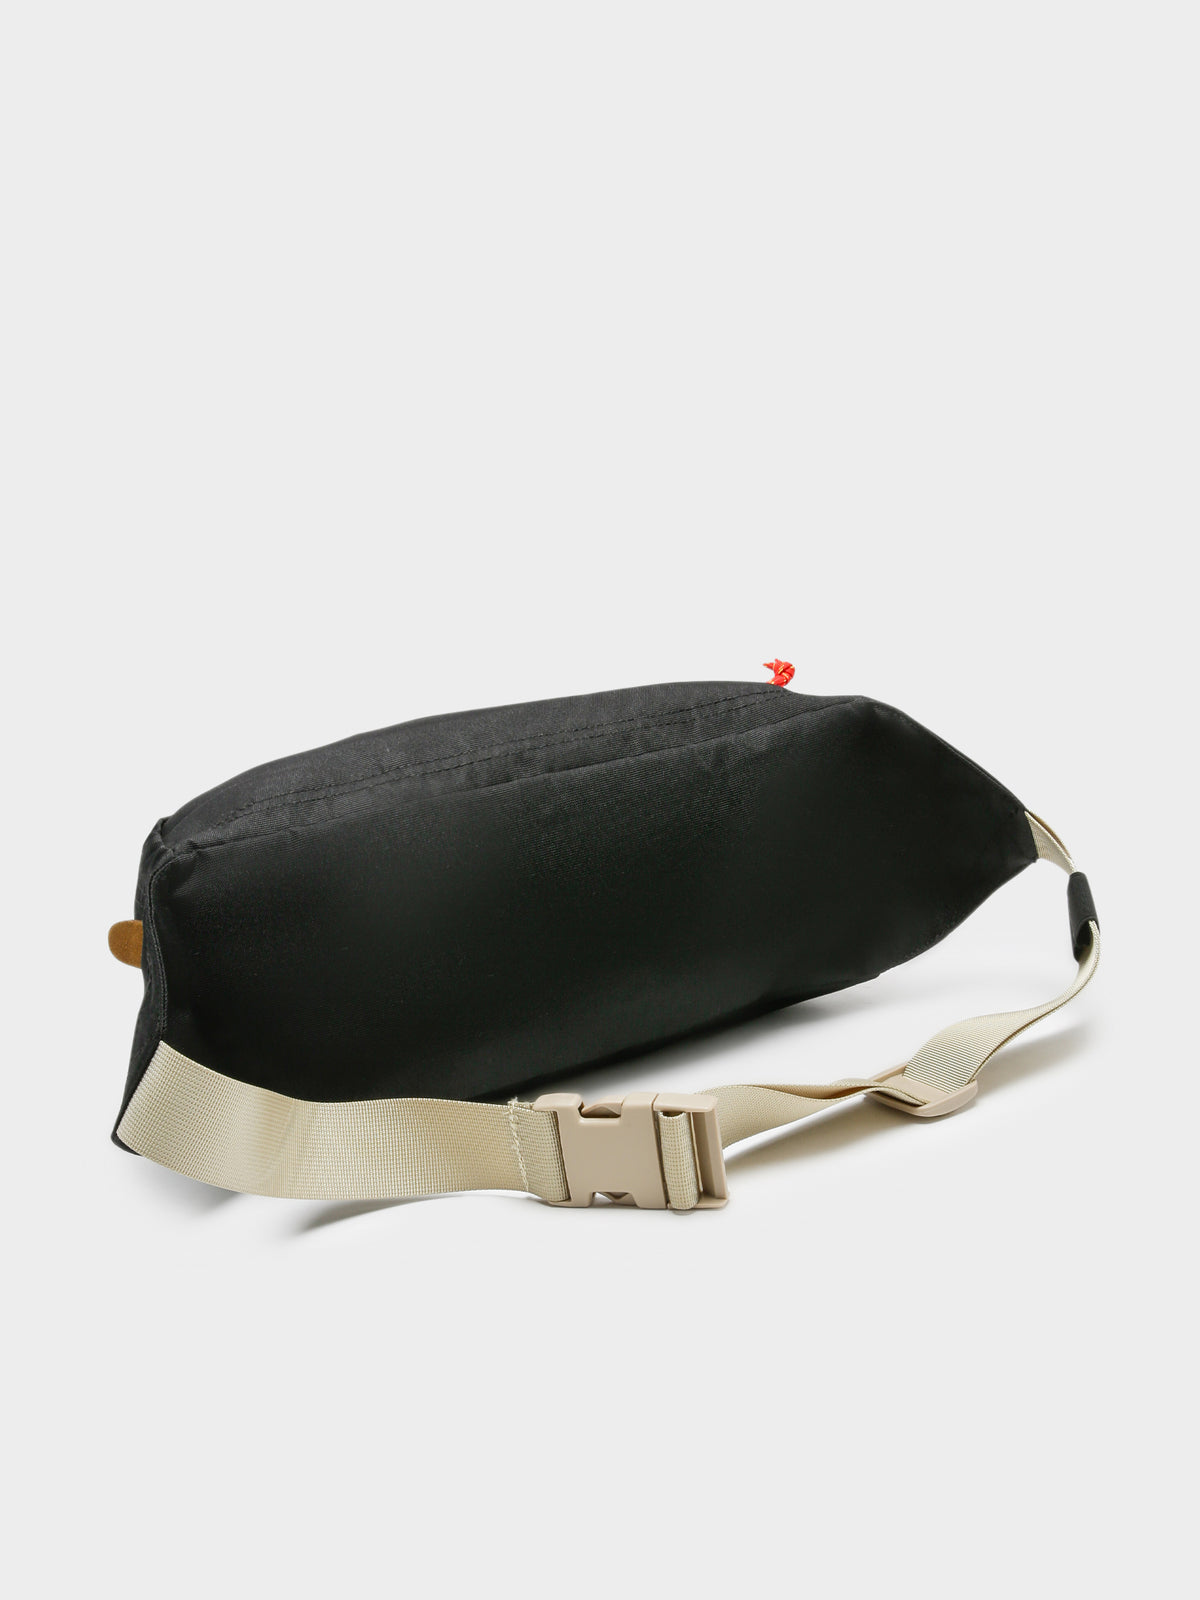 Vermont Fanny Pack in Black